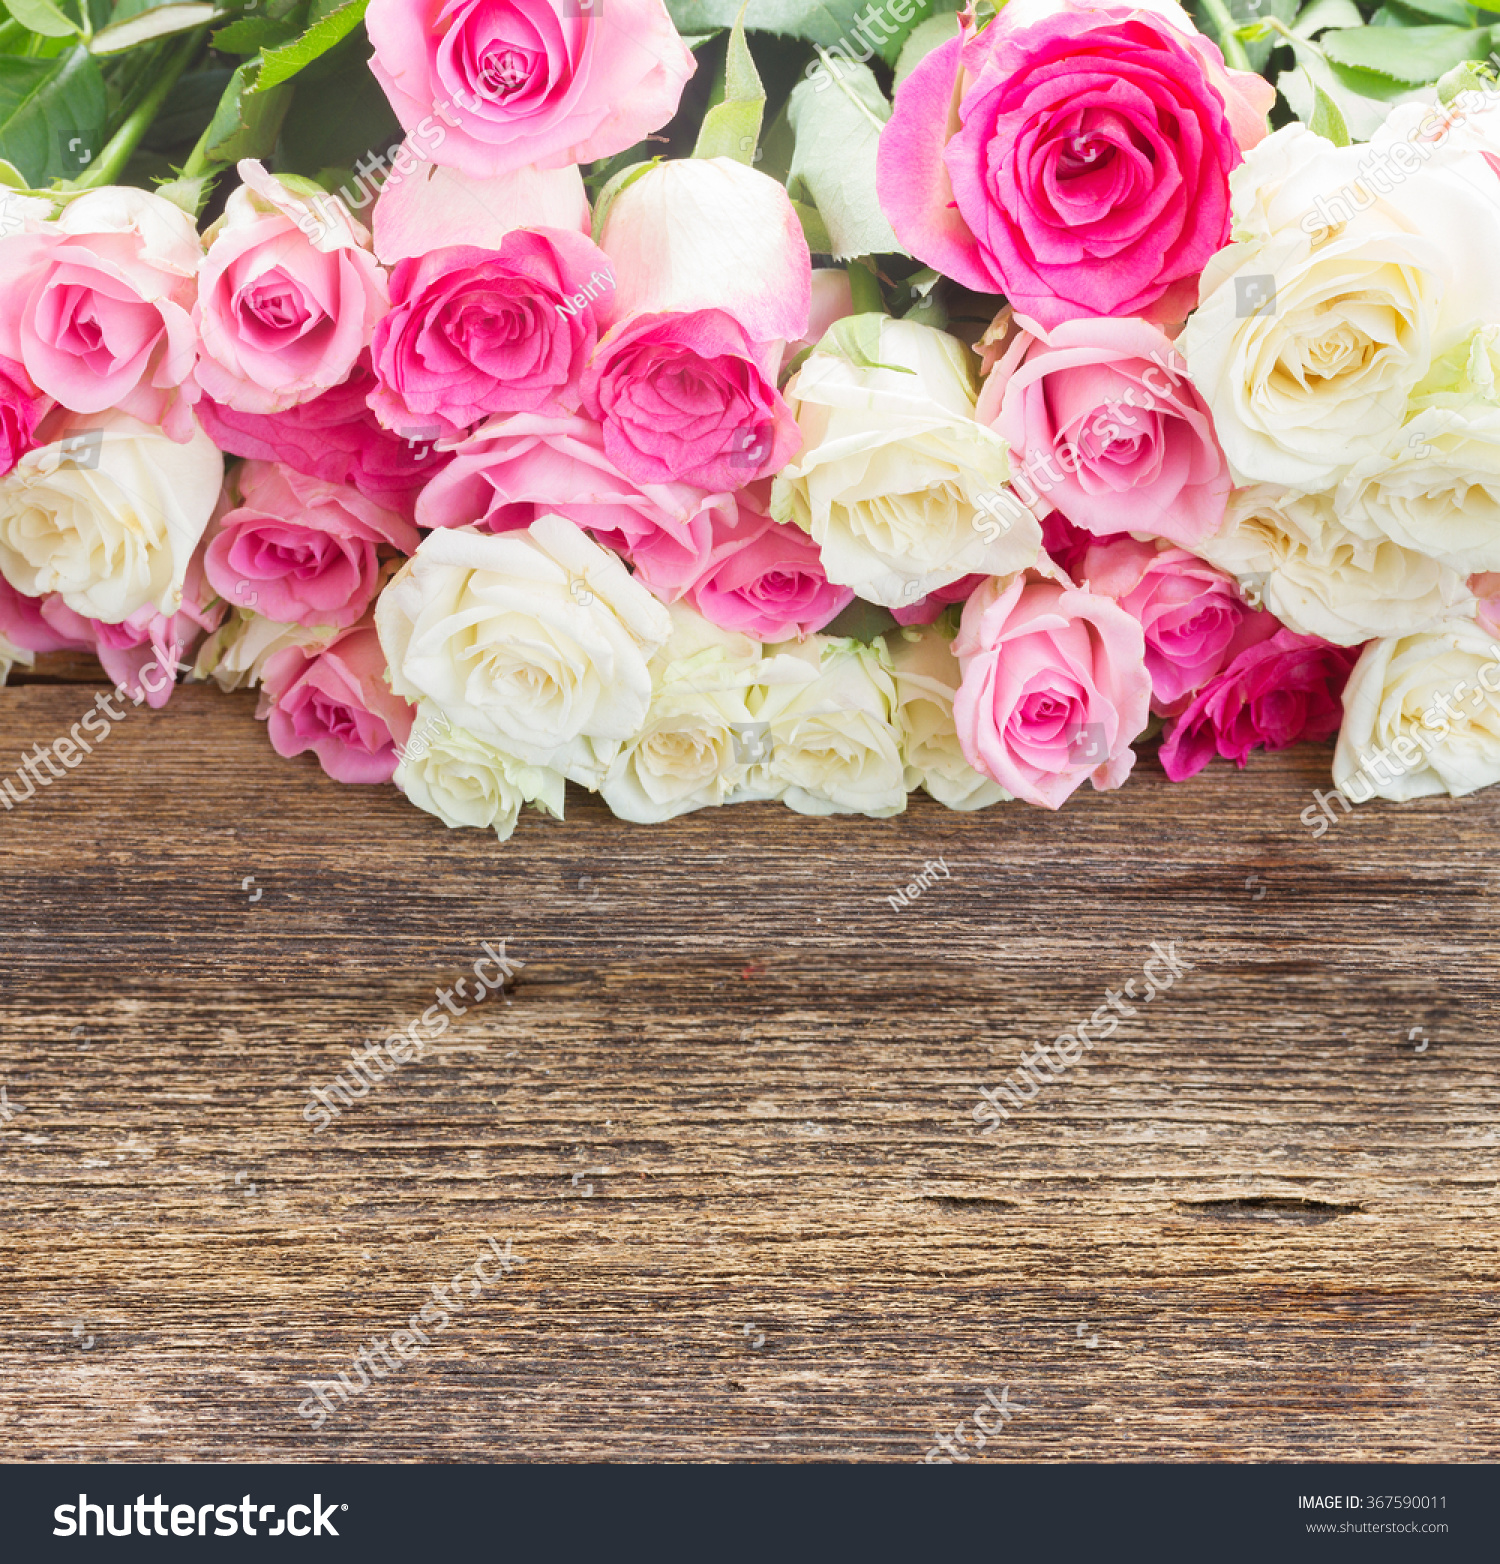 Bunch Pink White Roses On Wooden Stock Photo (Royalty Free ...